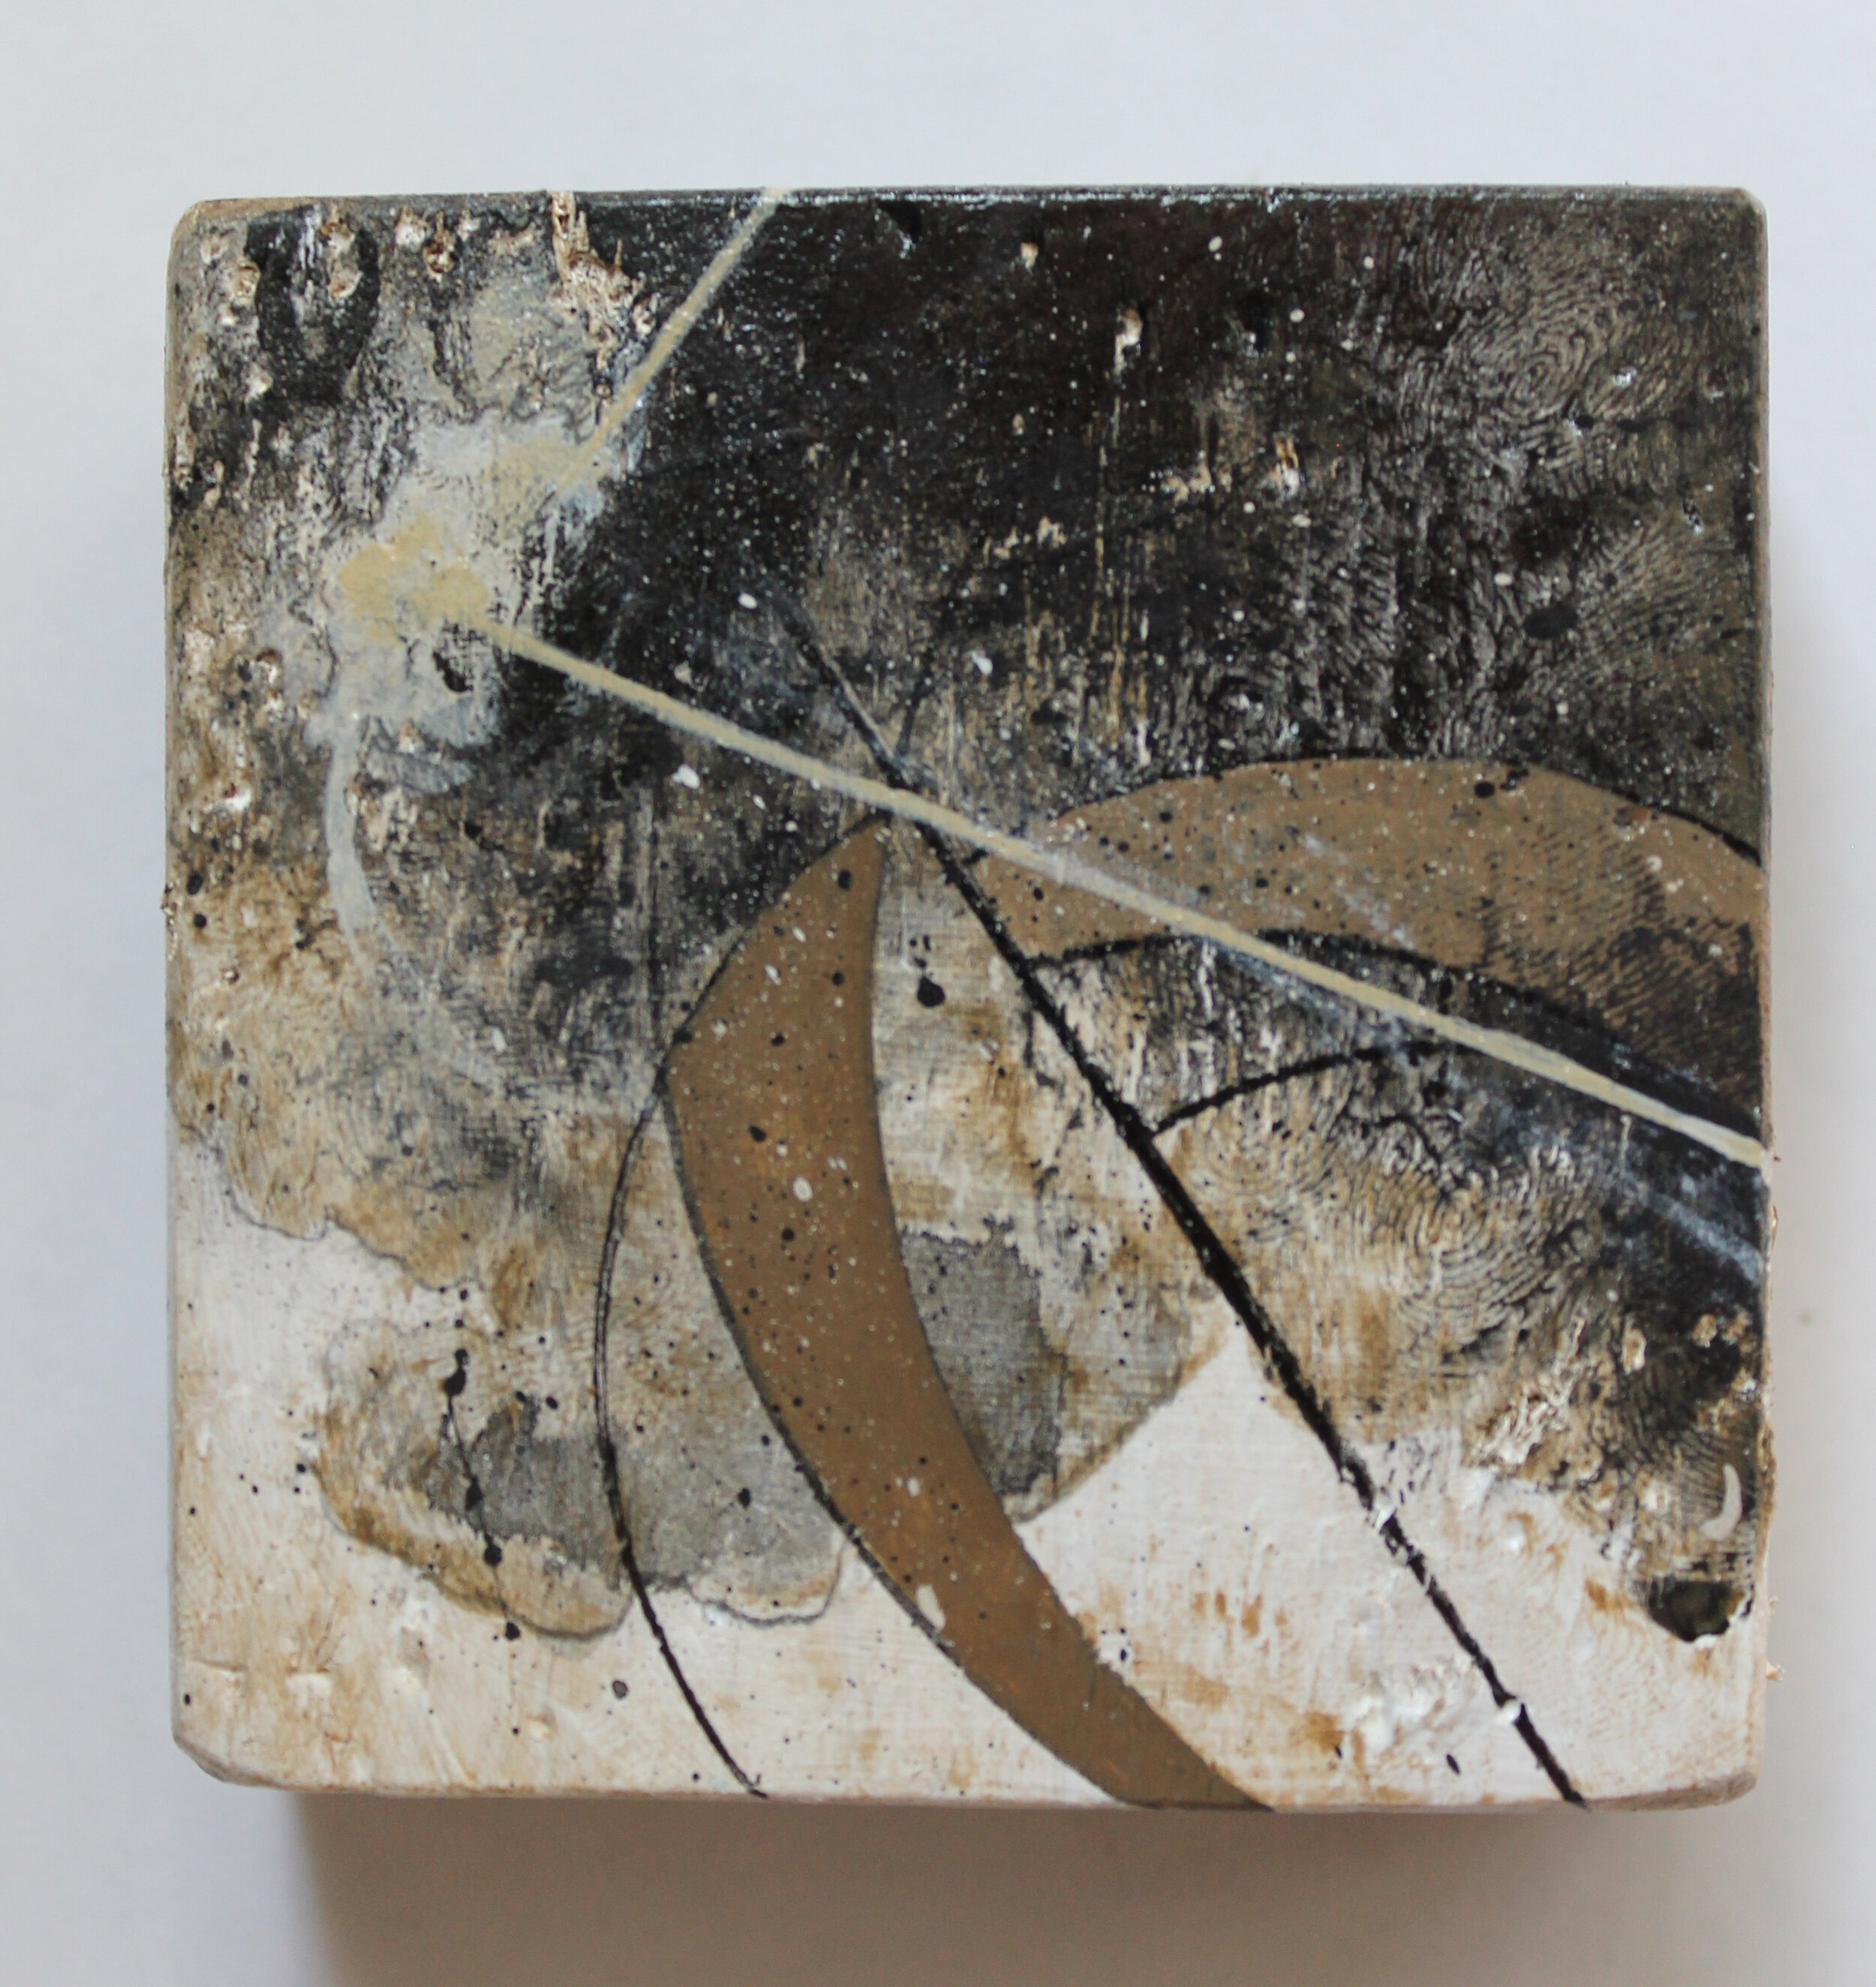  3 x 3 inches  Woodblock  Acrylic, Ink, Metal Leaf, Graphite  Summer, 2020 